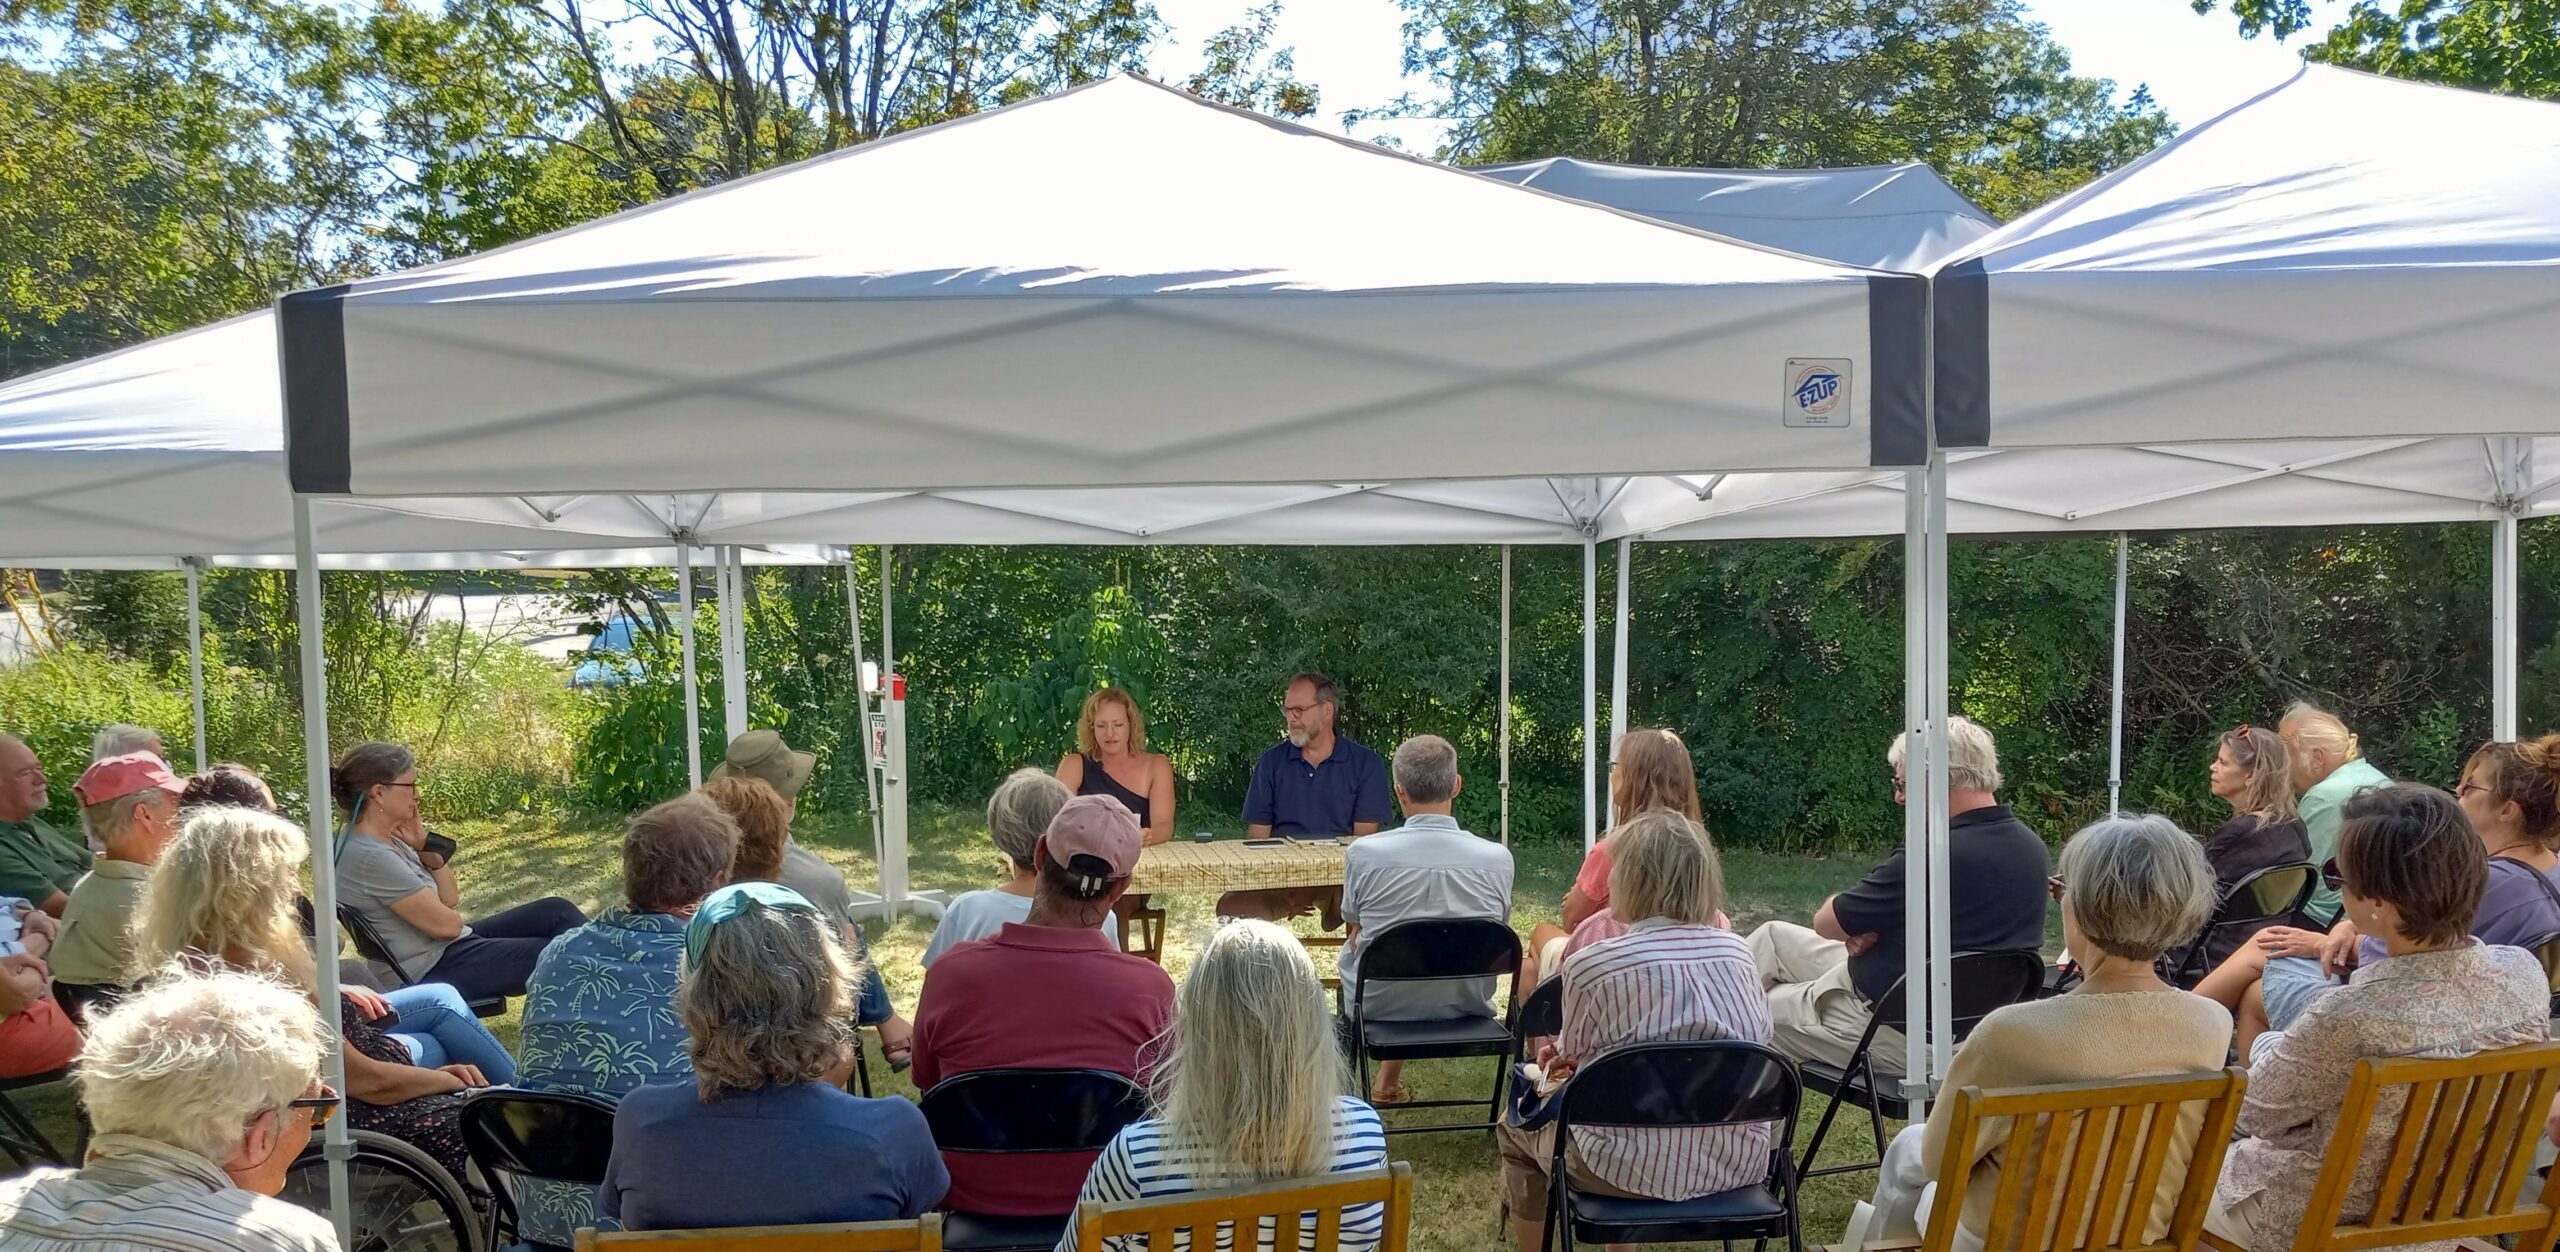 Image of Tents with audience of people at Christine Yurick and David Yezzi Poetry Event at the Friend Memorial Library side yard in August 2022